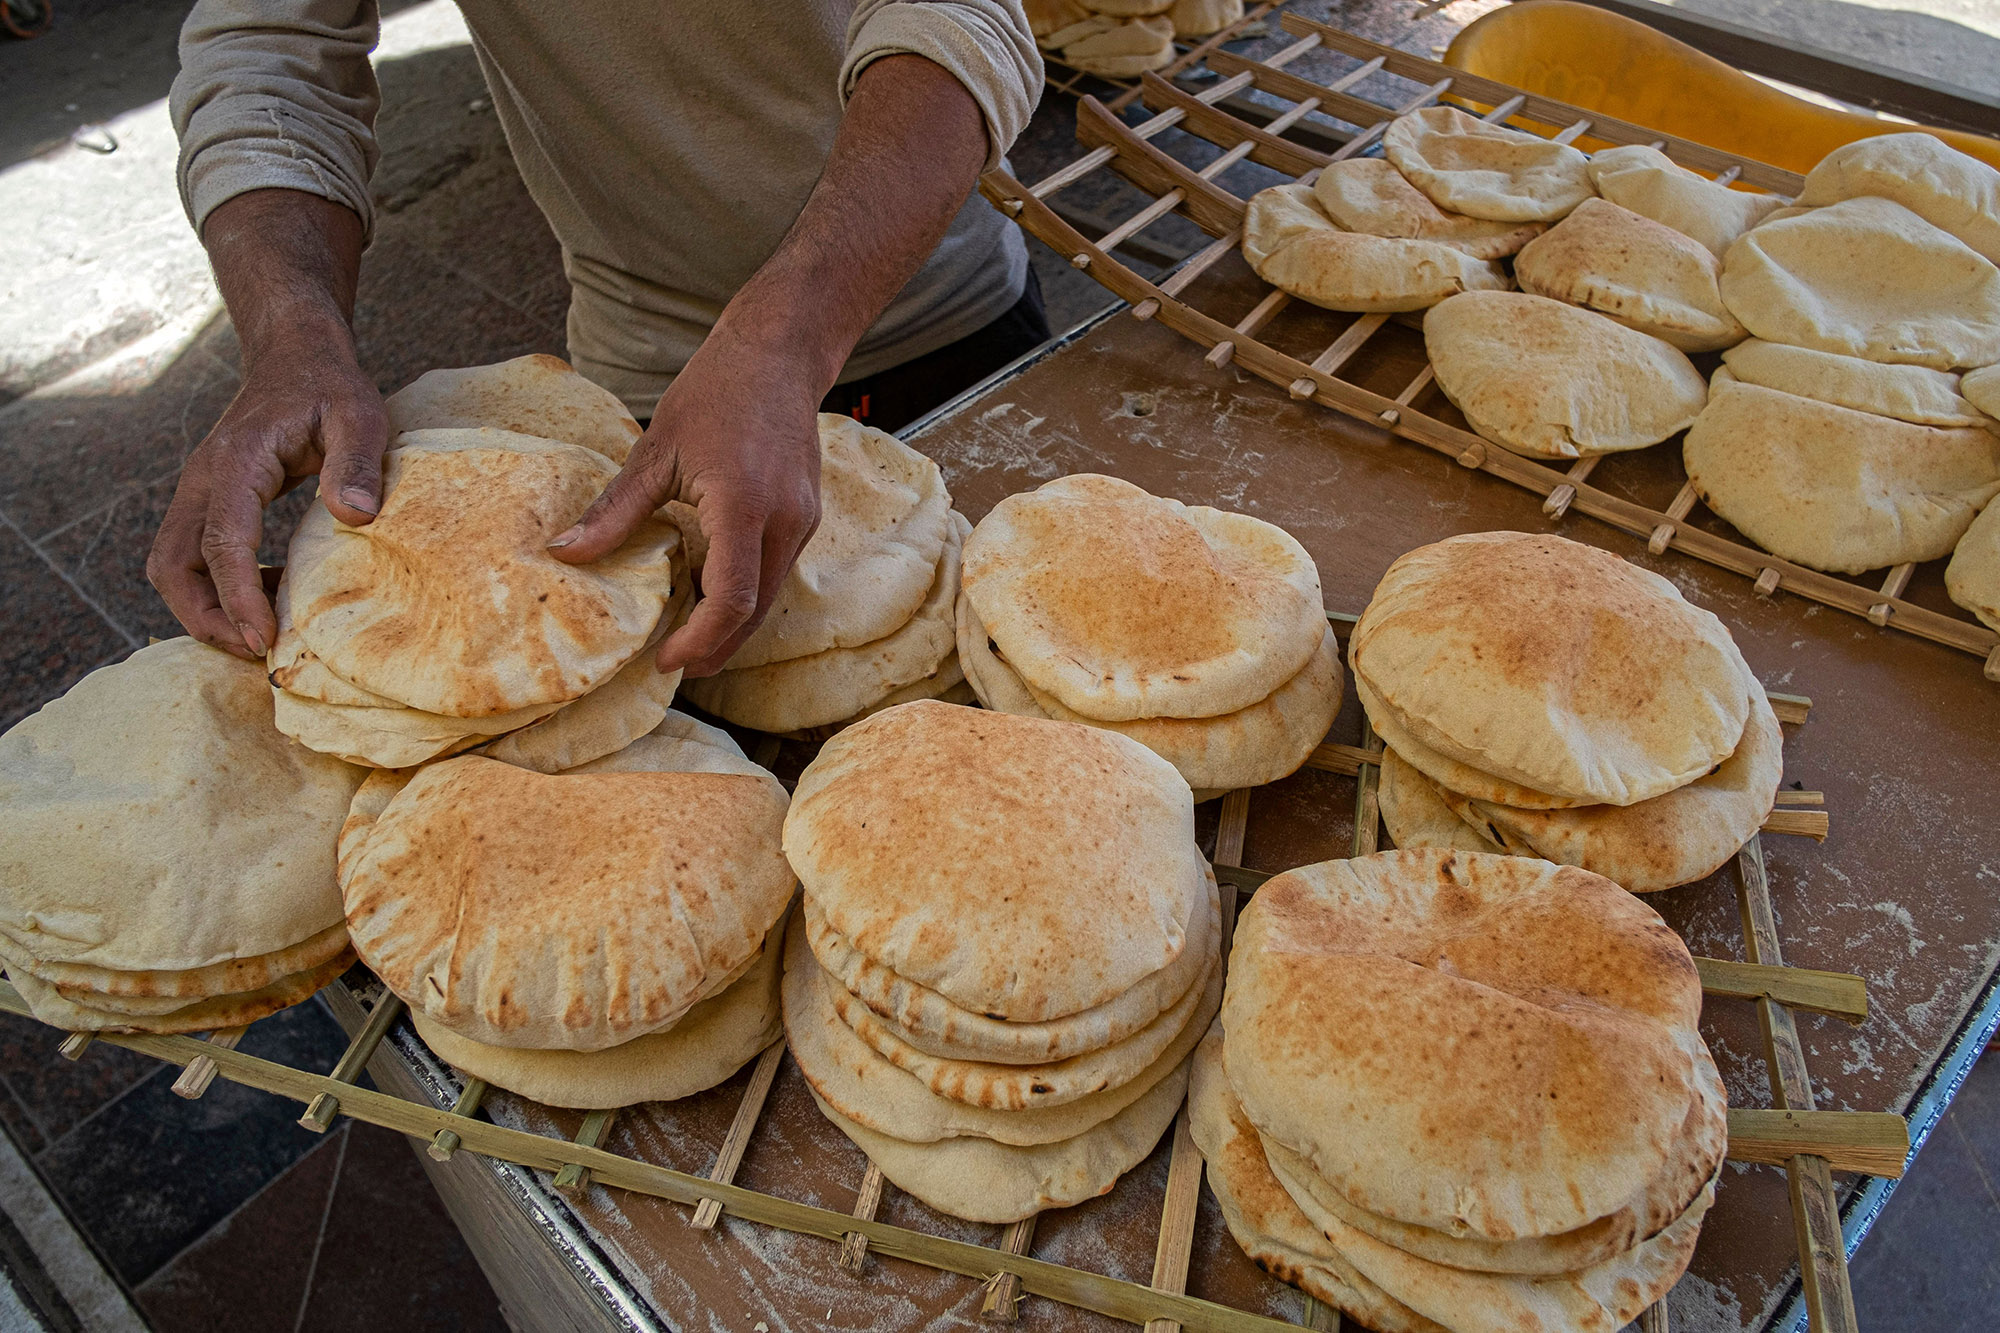 A bakery at a market in Cairo.